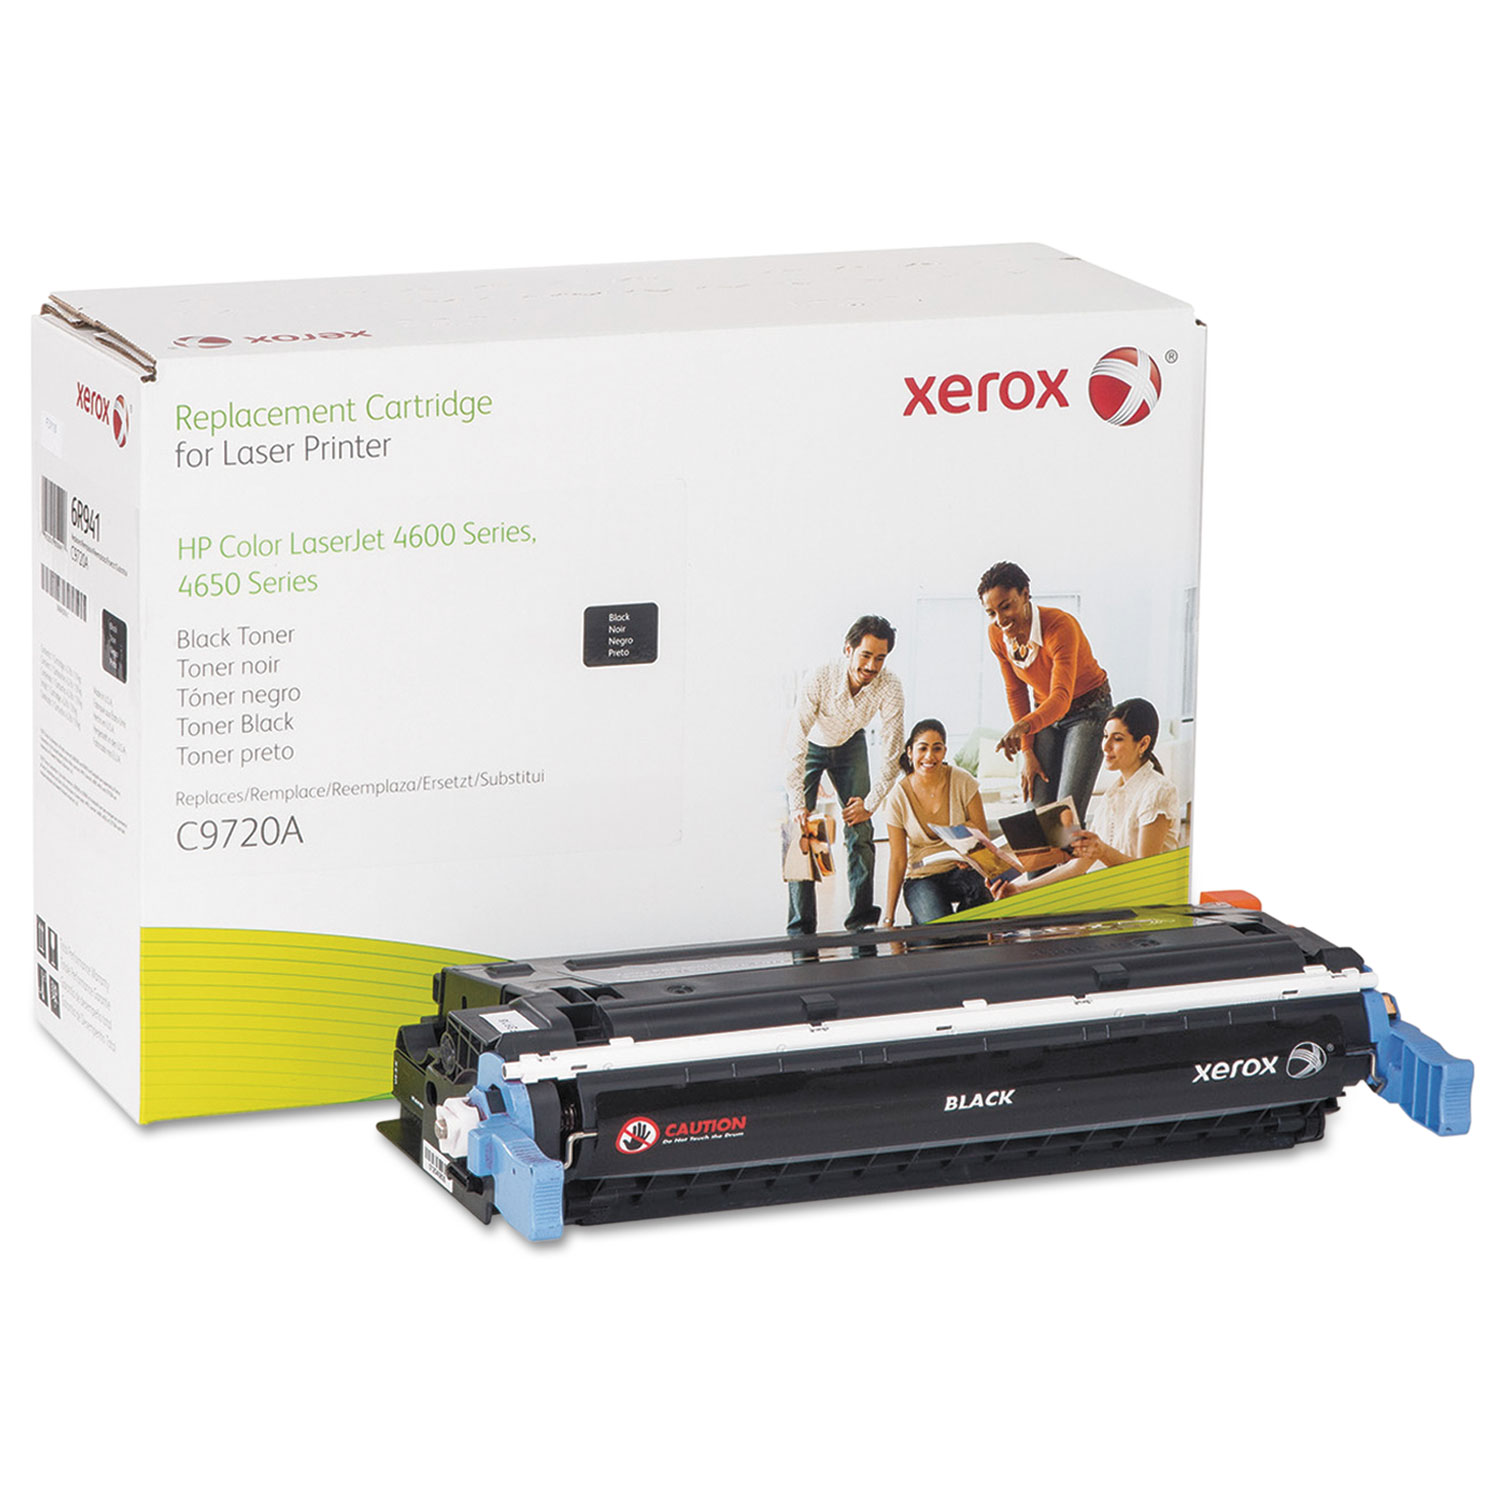  Xerox 006R00941 006R00941 Replacement Toner for C9720A (641A), Black (XER006R00941) 